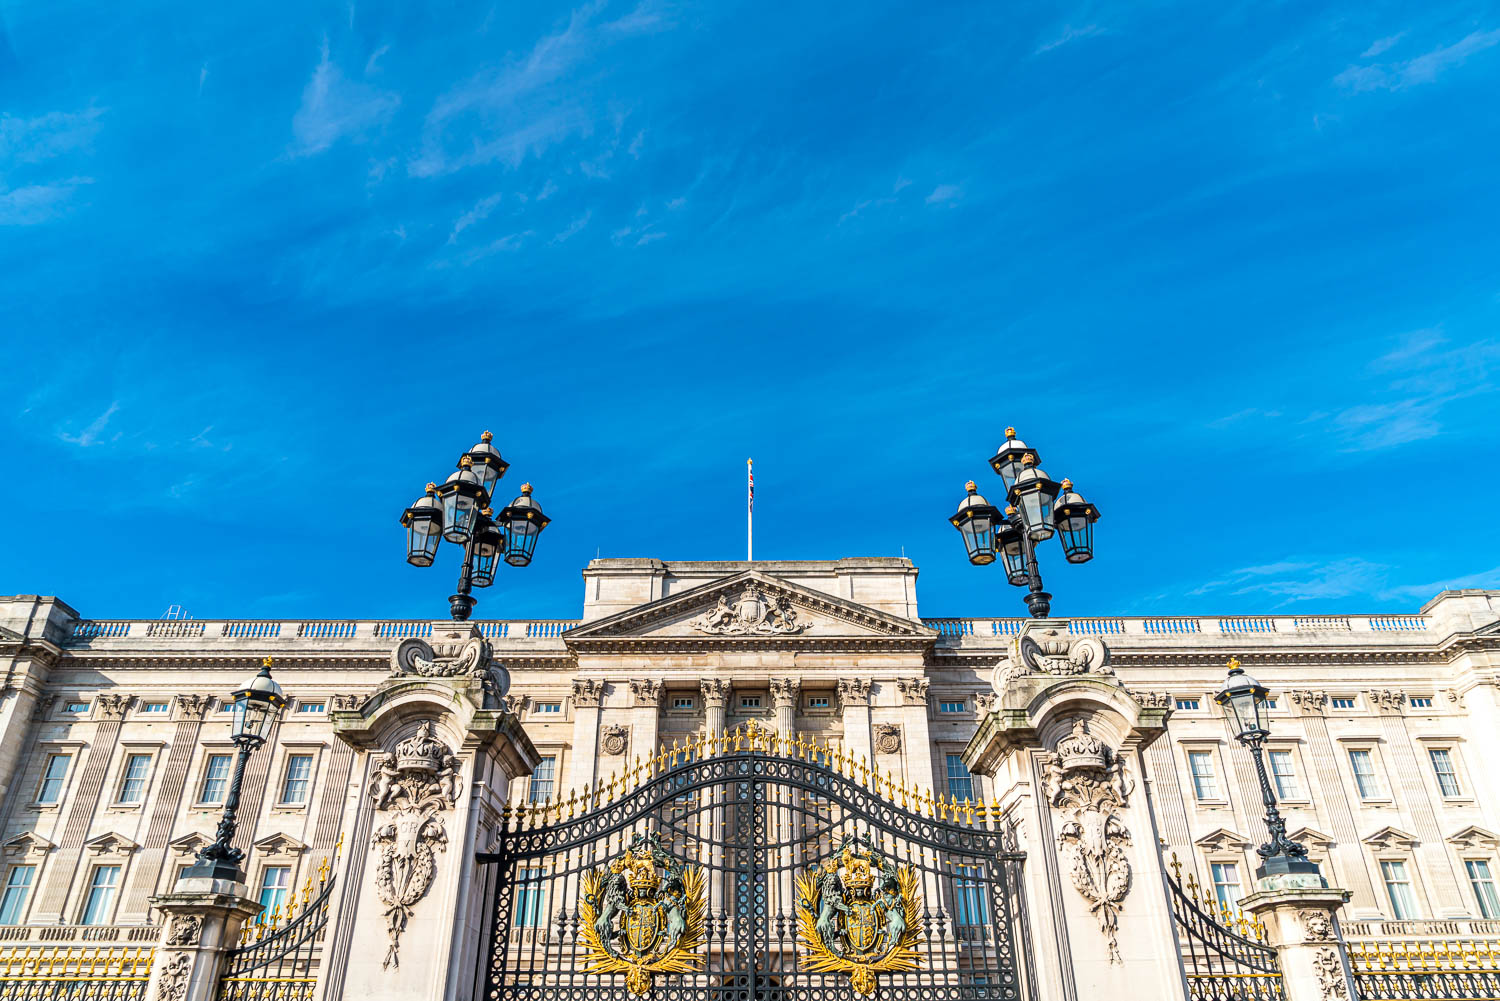 Gilded gates and front view of Buckingham Palace - my tips on visiting Buckingham Palace with kids for the summer opening of the state rooms